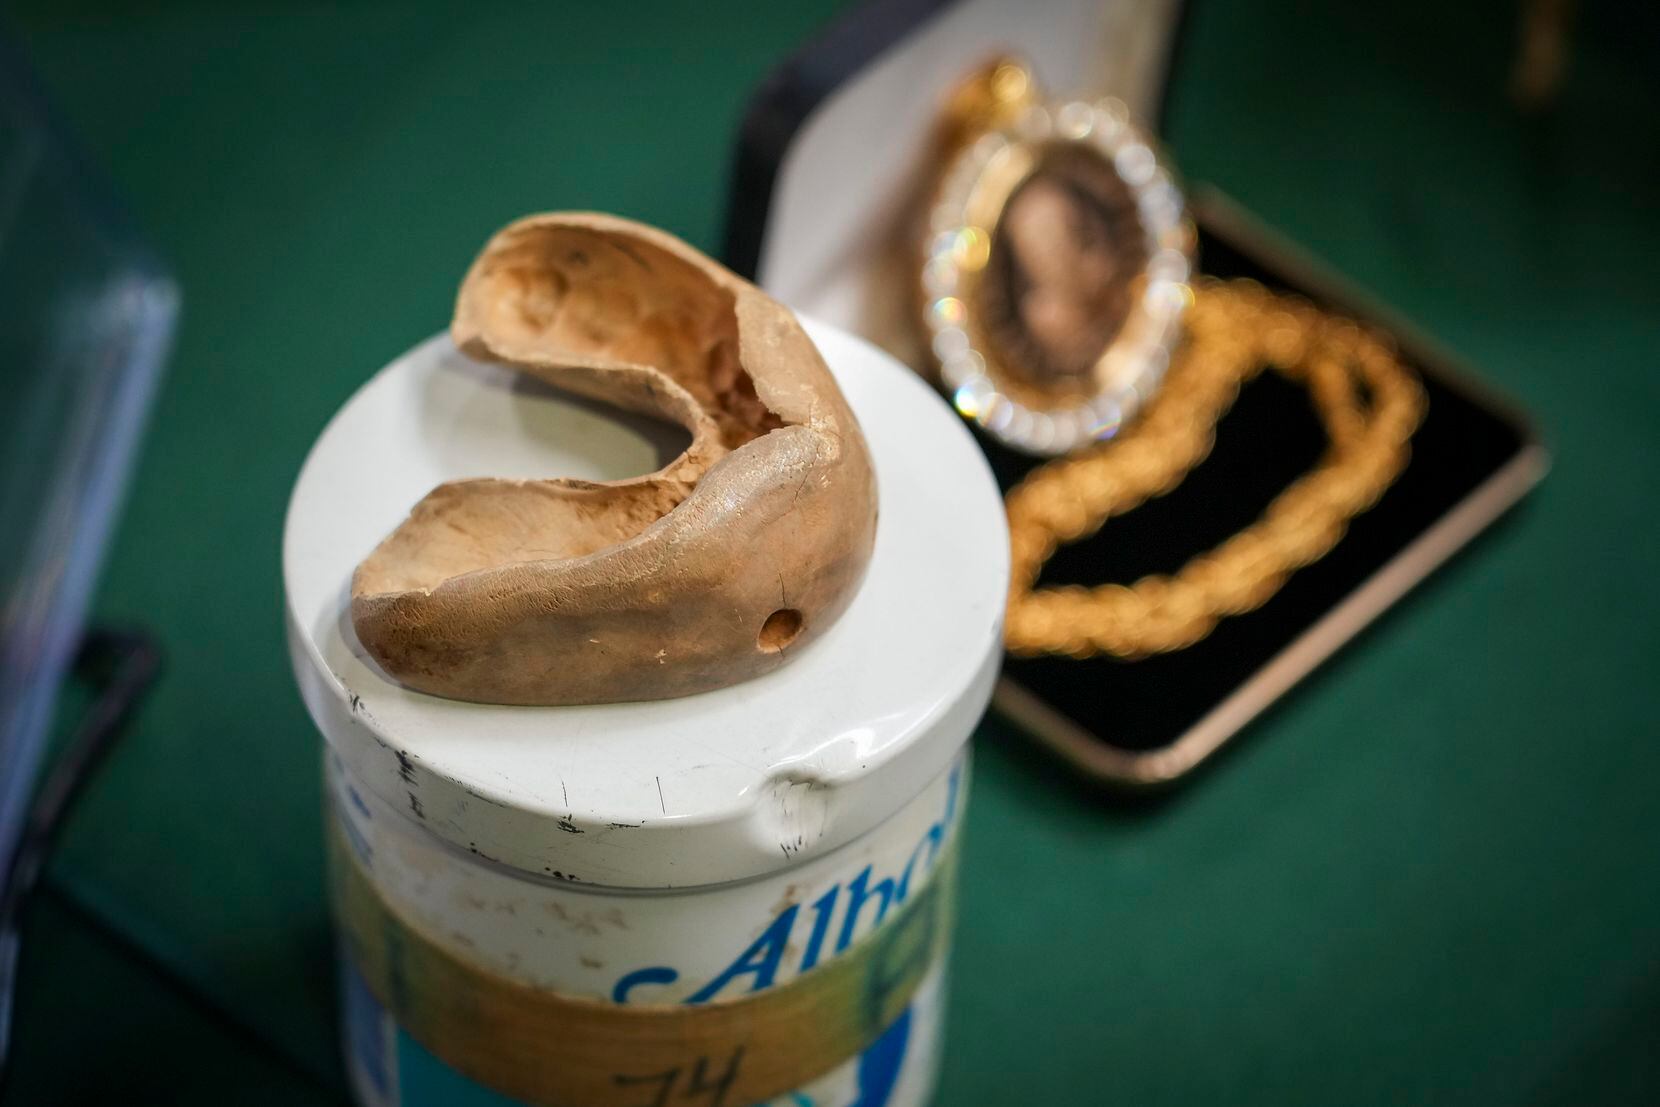 1974 Muhammad Ali mouthpiece from "The Rumble in the Jungle" is displayed during a press...